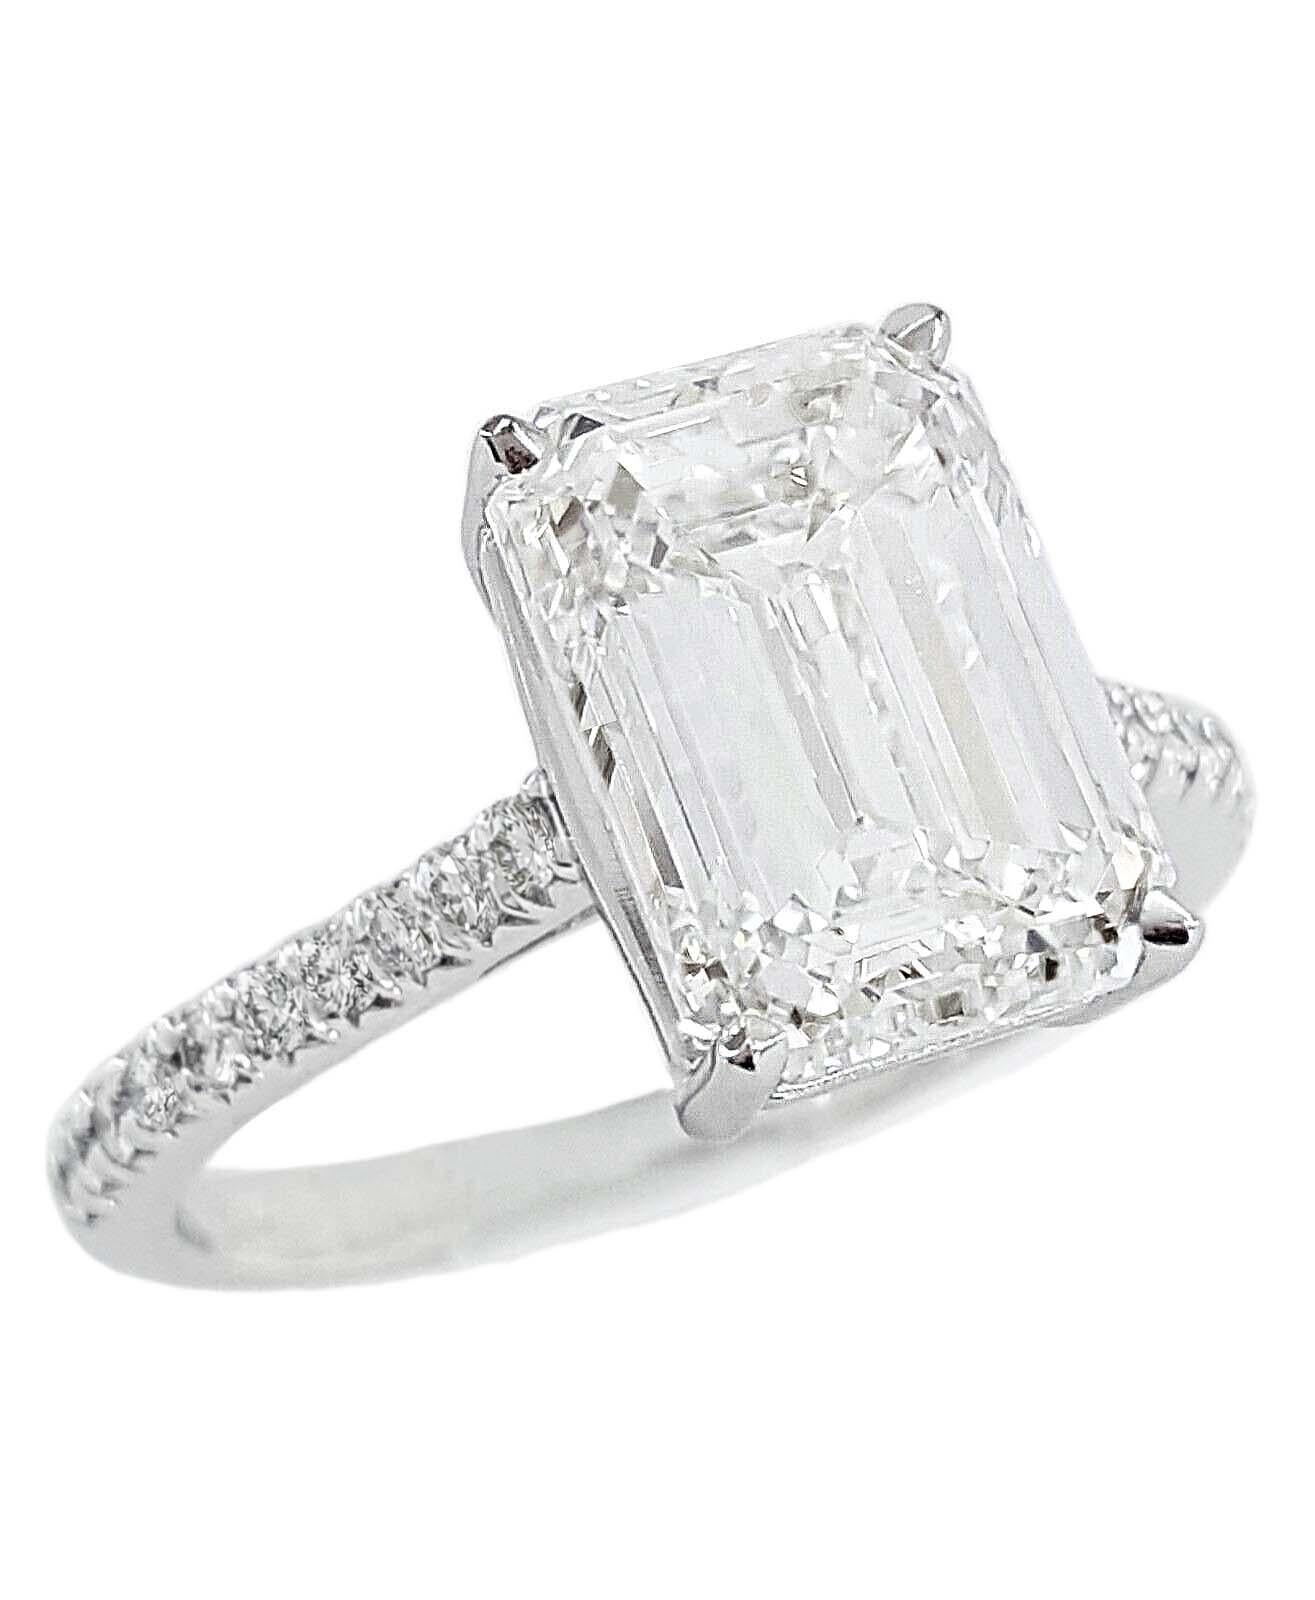 Modern Tiffany& Co. 4 Carat Emerald Cut Diamond Solitaire Engagement Platinum Ring For Sale